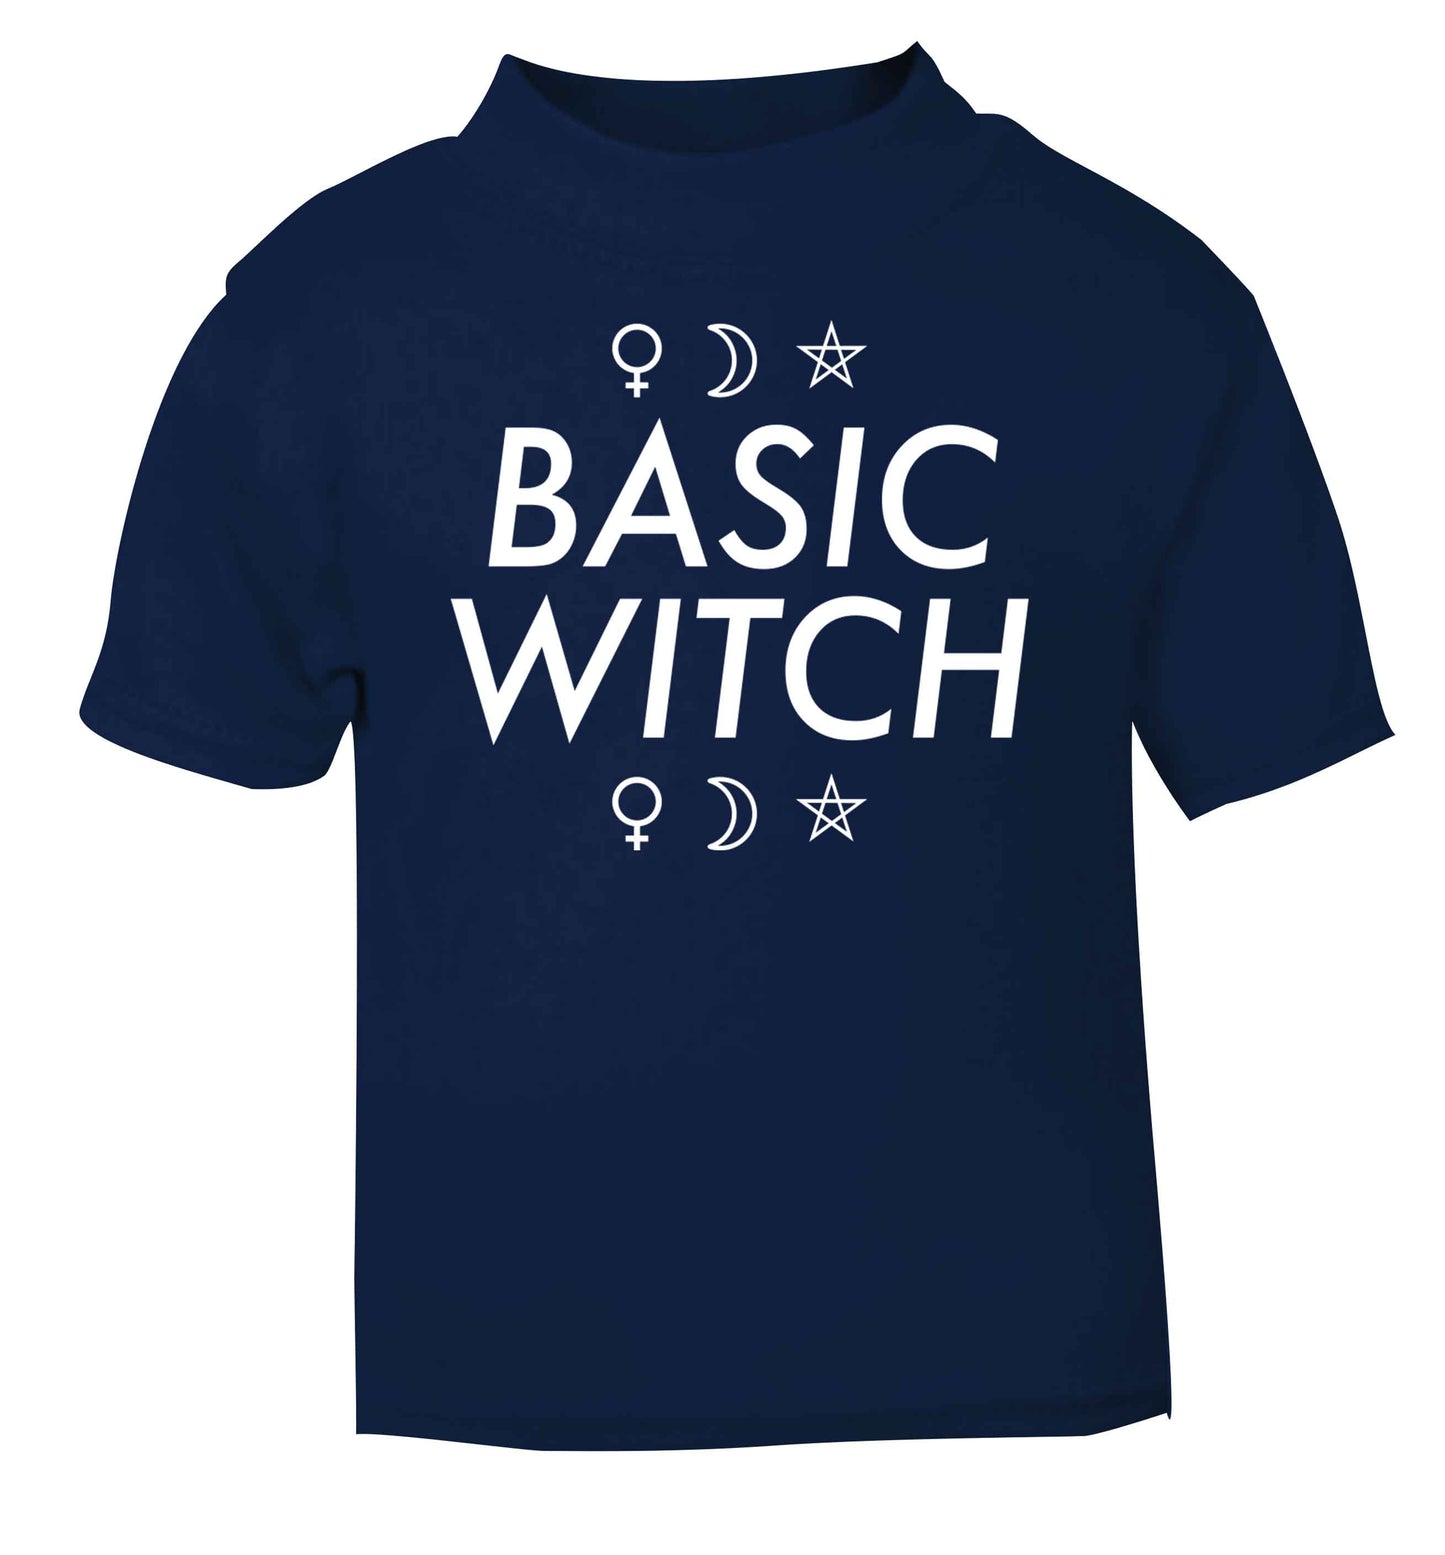 Basic witch 1 navy baby toddler Tshirt 2 Years